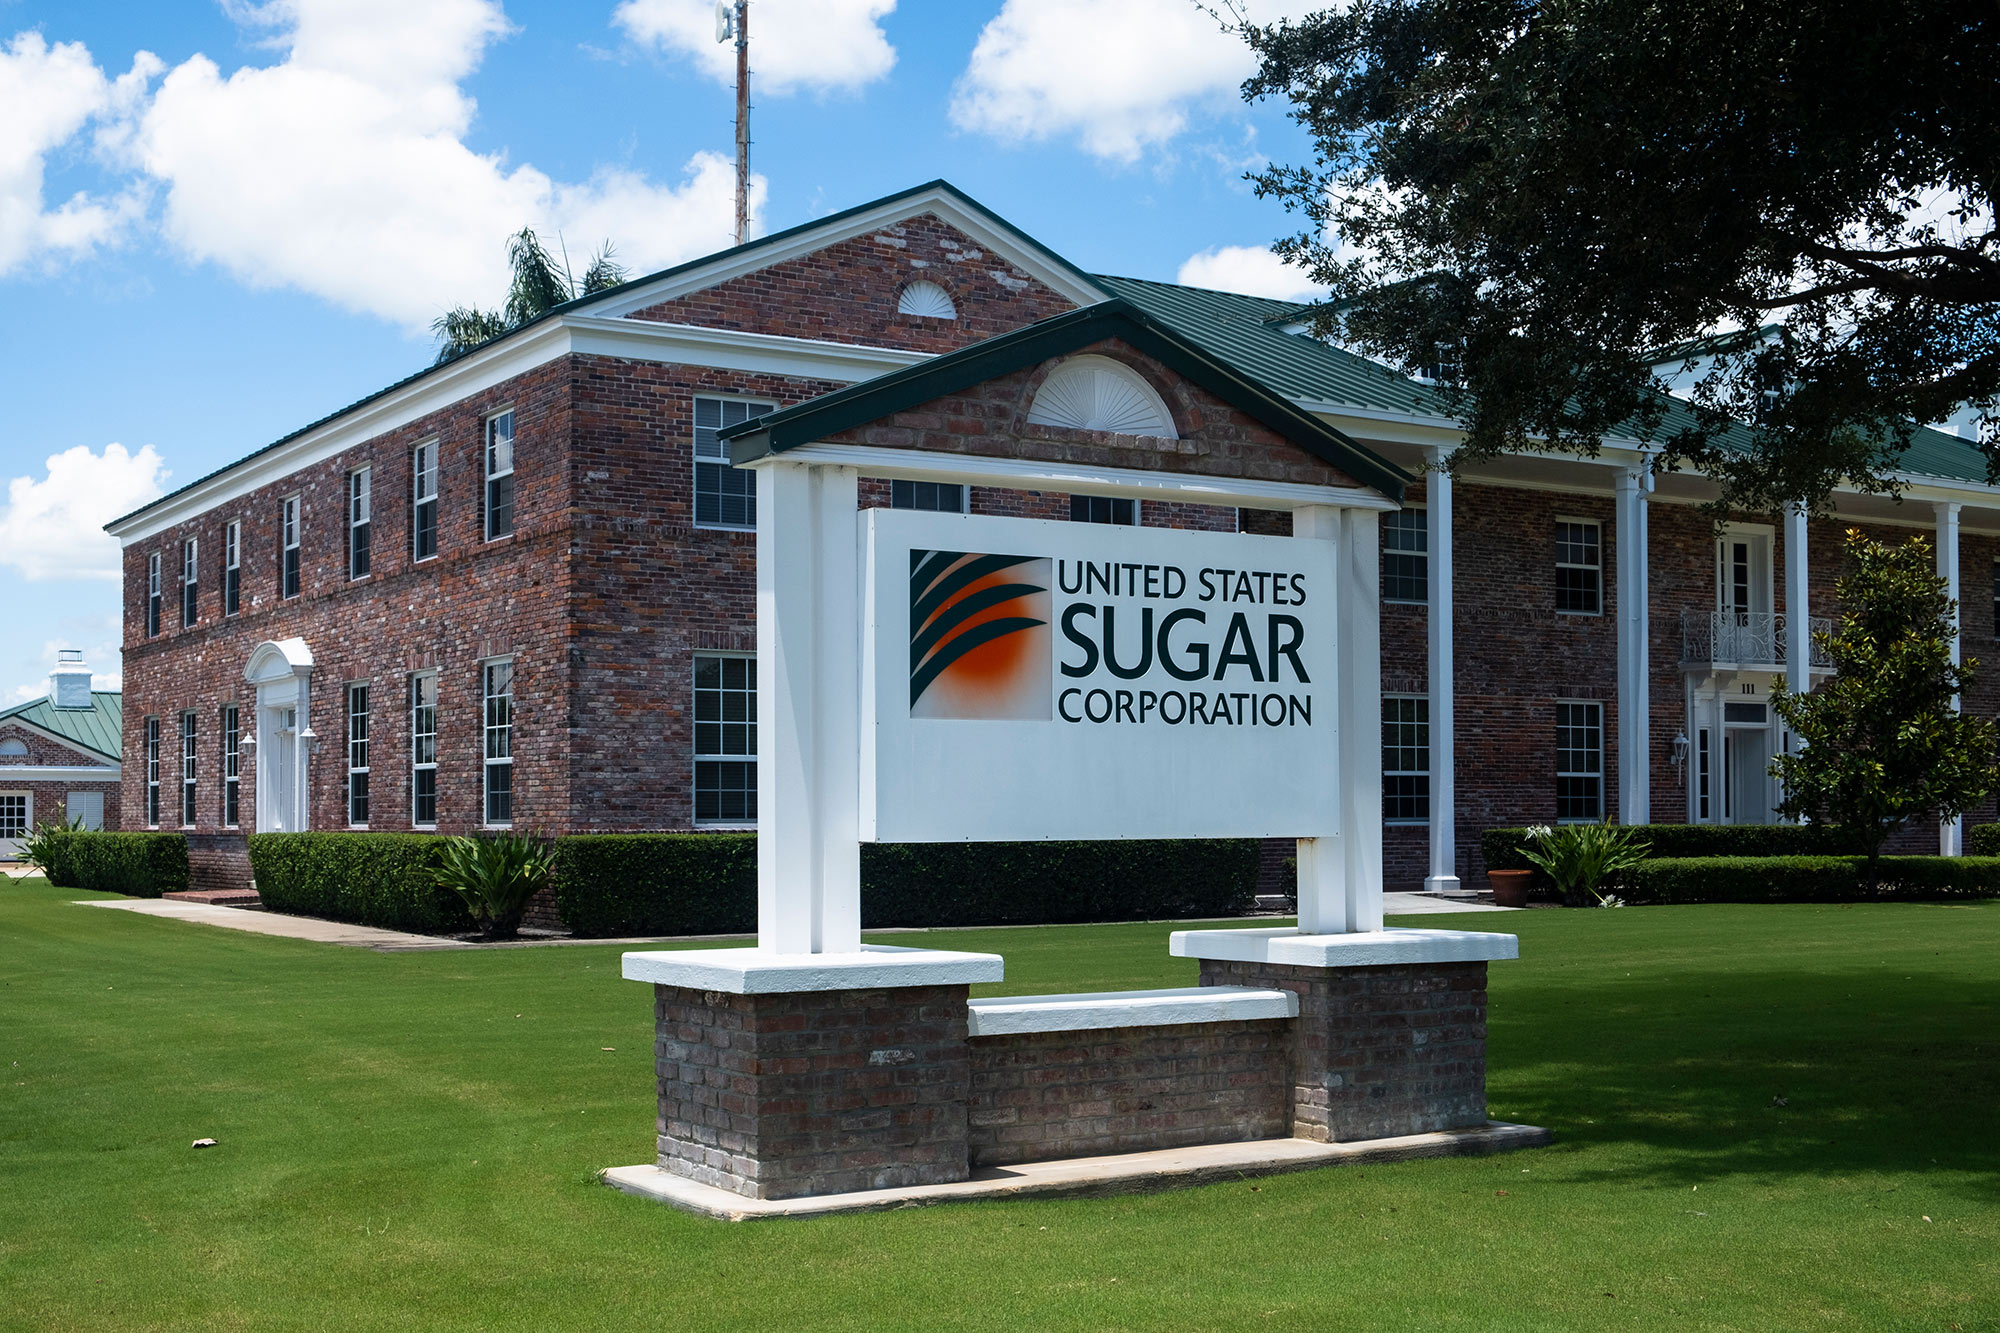 Local activists in the Glades have reported that their complaints filed to Florida government agencies have been referred to the sugar industry, including Clewiston-based U.S. Sugar.